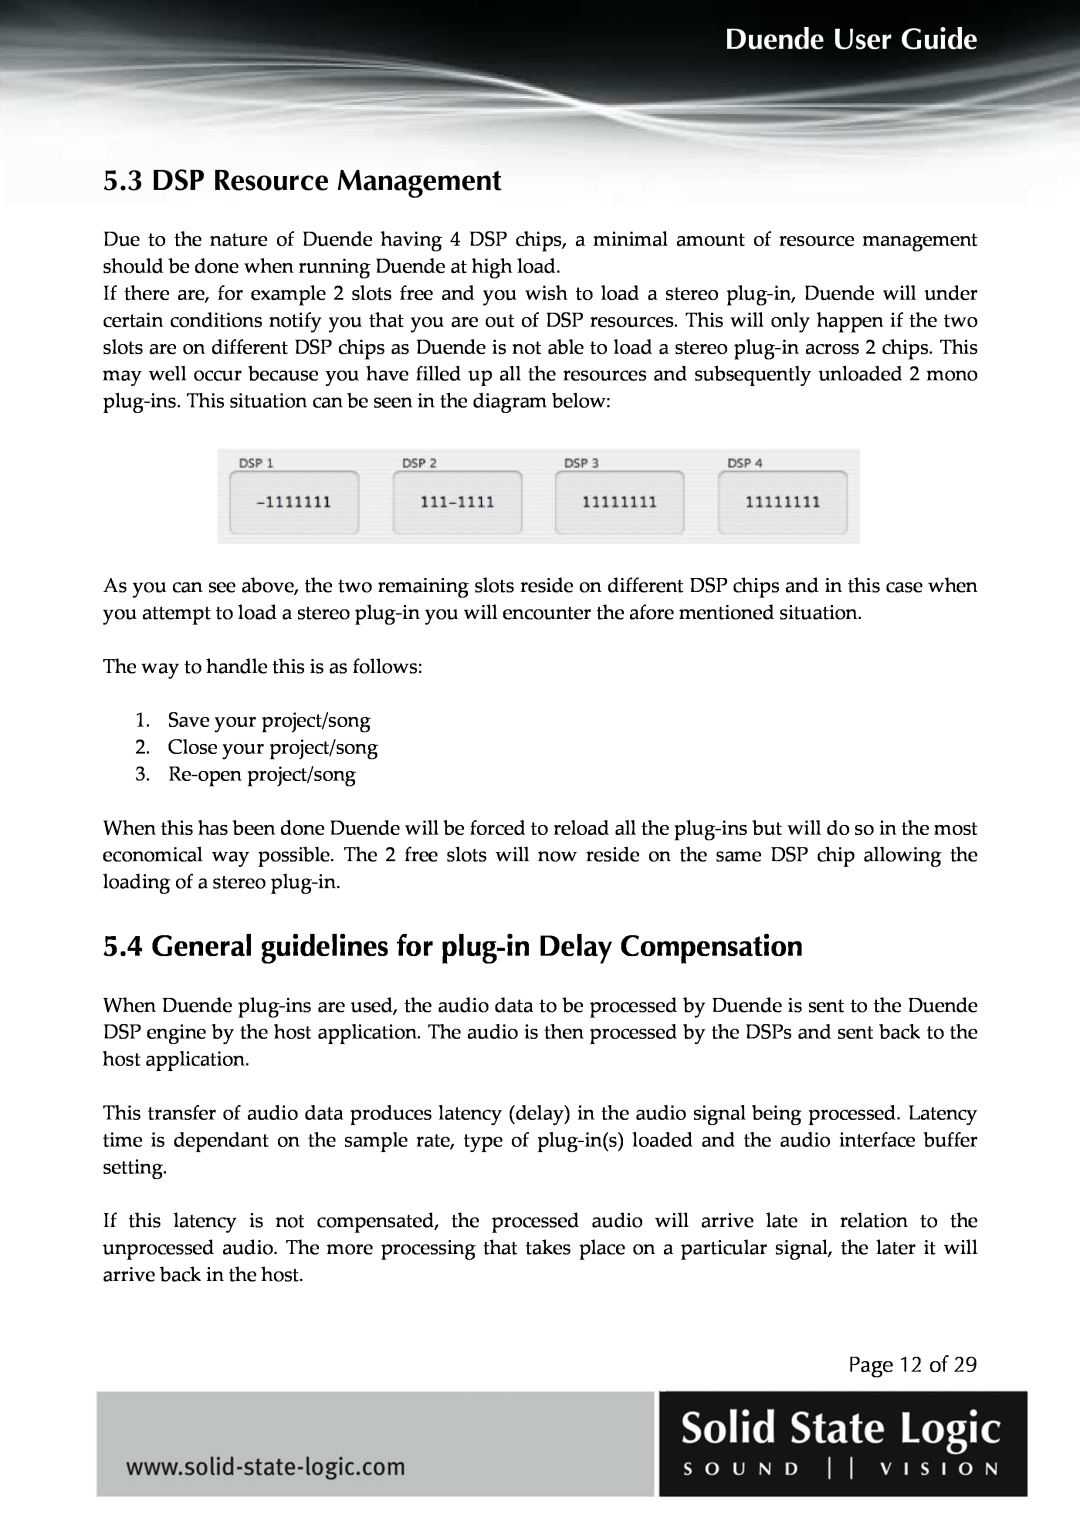 Solid State Logic DUENDE manual DSP Resource Management, Page 12 of, Duende User Guide 